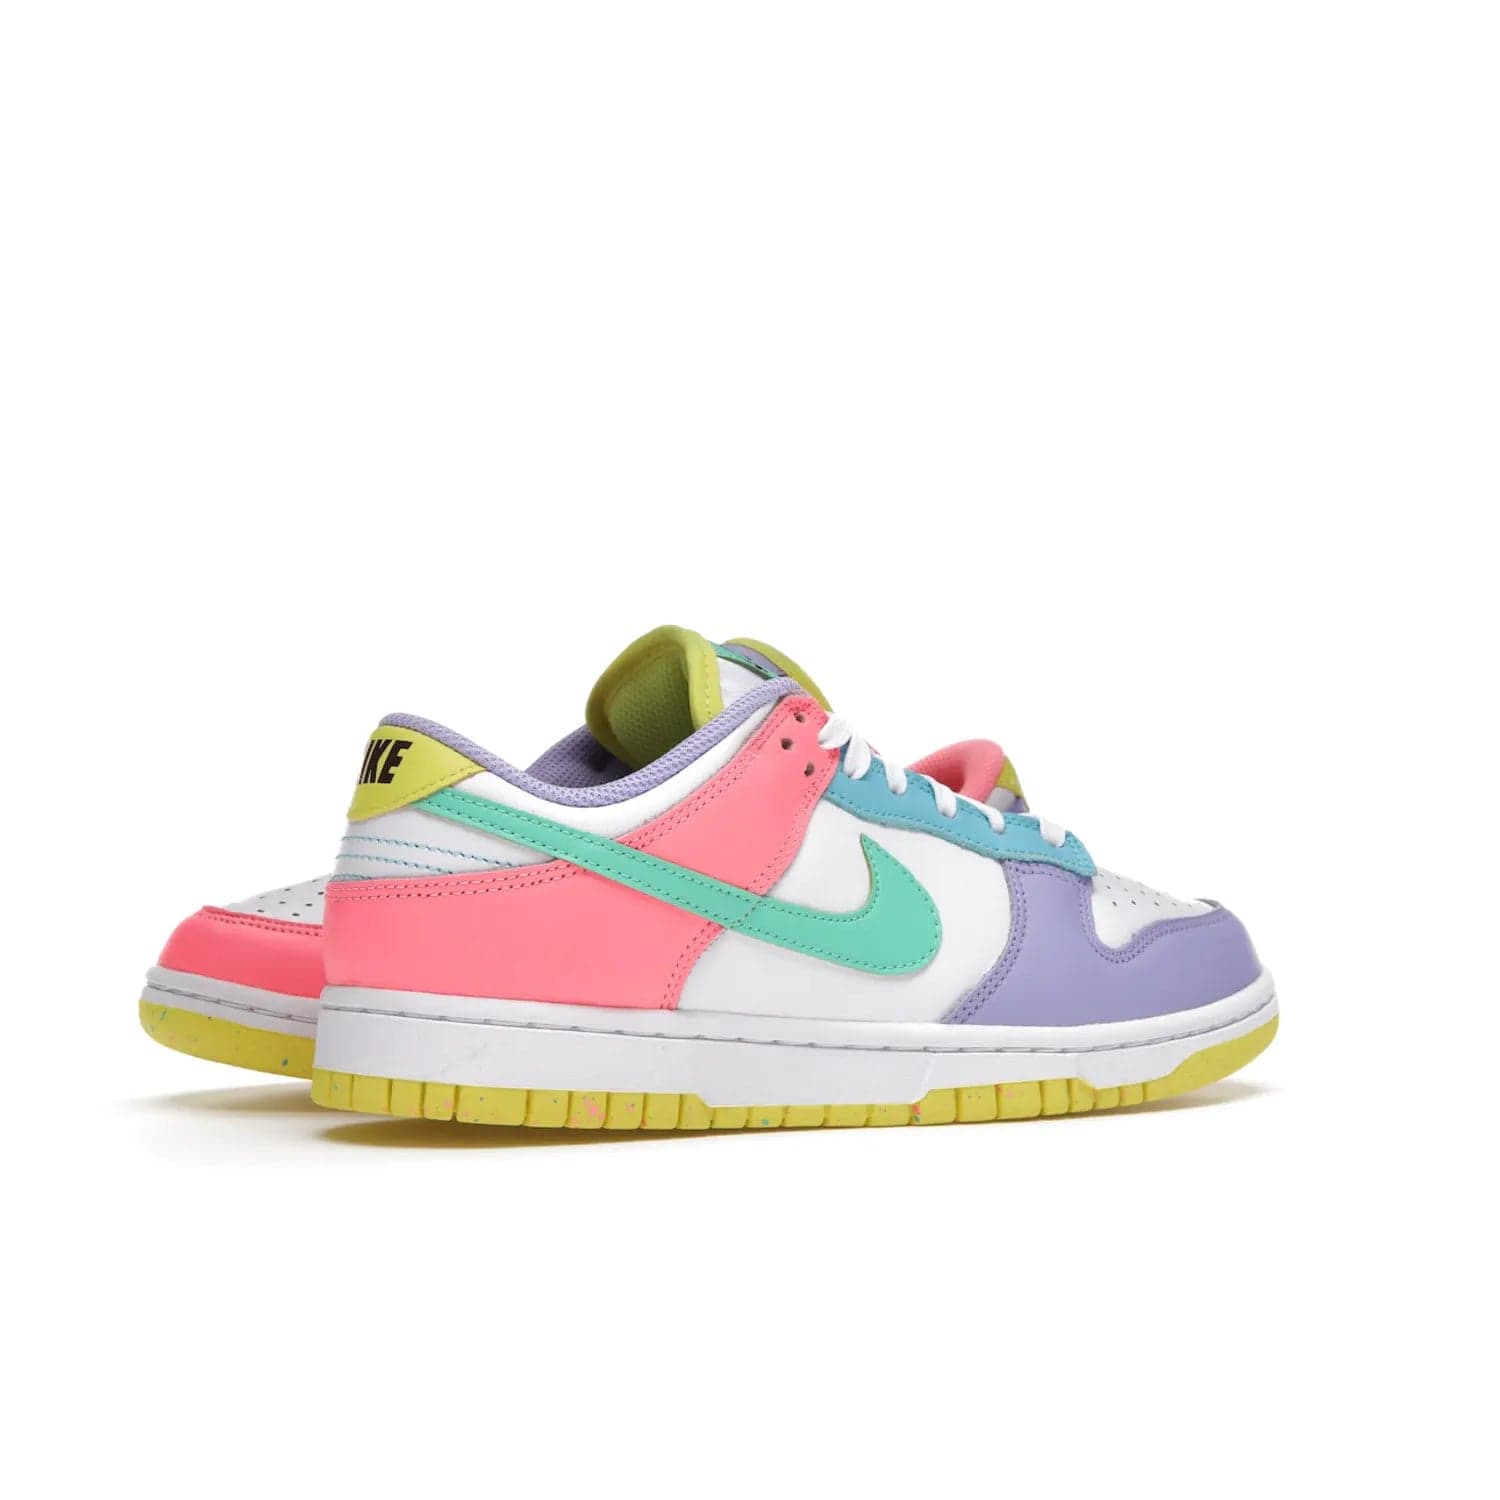 Nike Dunk Low SE Easter Candy (Women's) - Image 34 - Only at www.BallersClubKickz.com - UP
The Nike Dunk Low SE Easter Candy (Women's) brings a stylish touch to any outfit with its white leather upper, colorful accents, and multicolor speckle detailing. Shop now before they're gone.